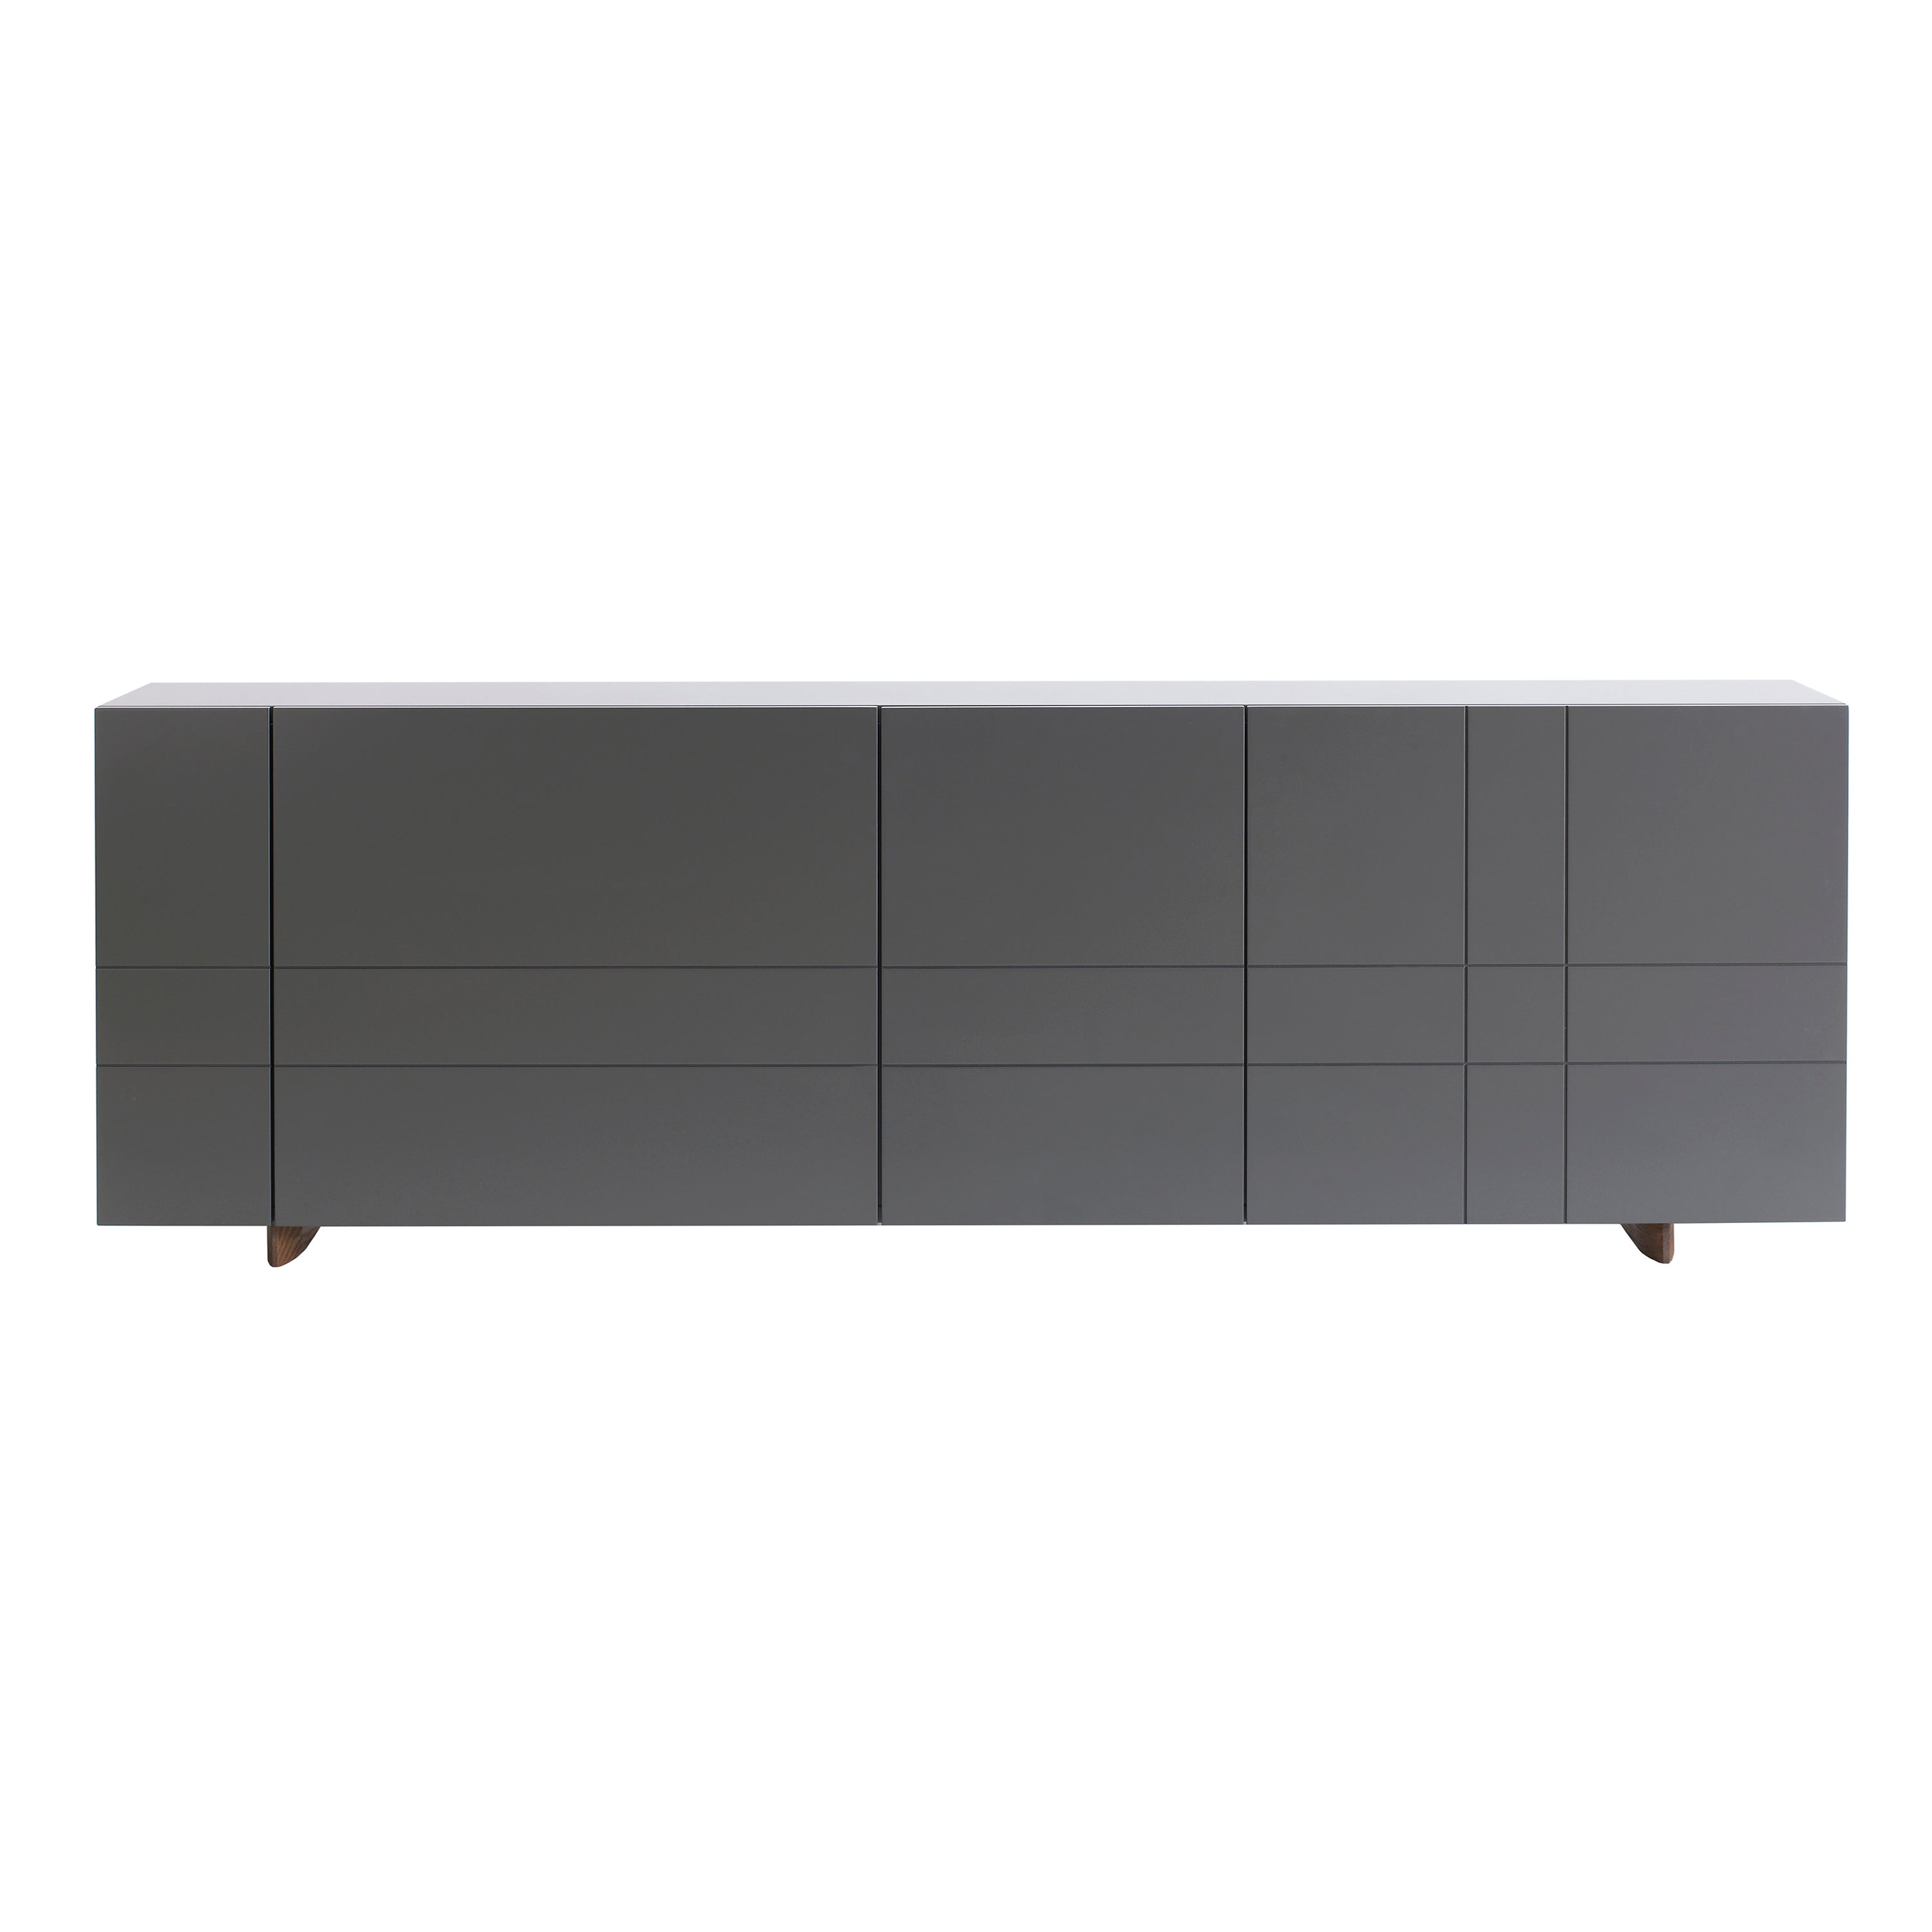 Kilt Sideboard 180 with Doors: Large - 17.7